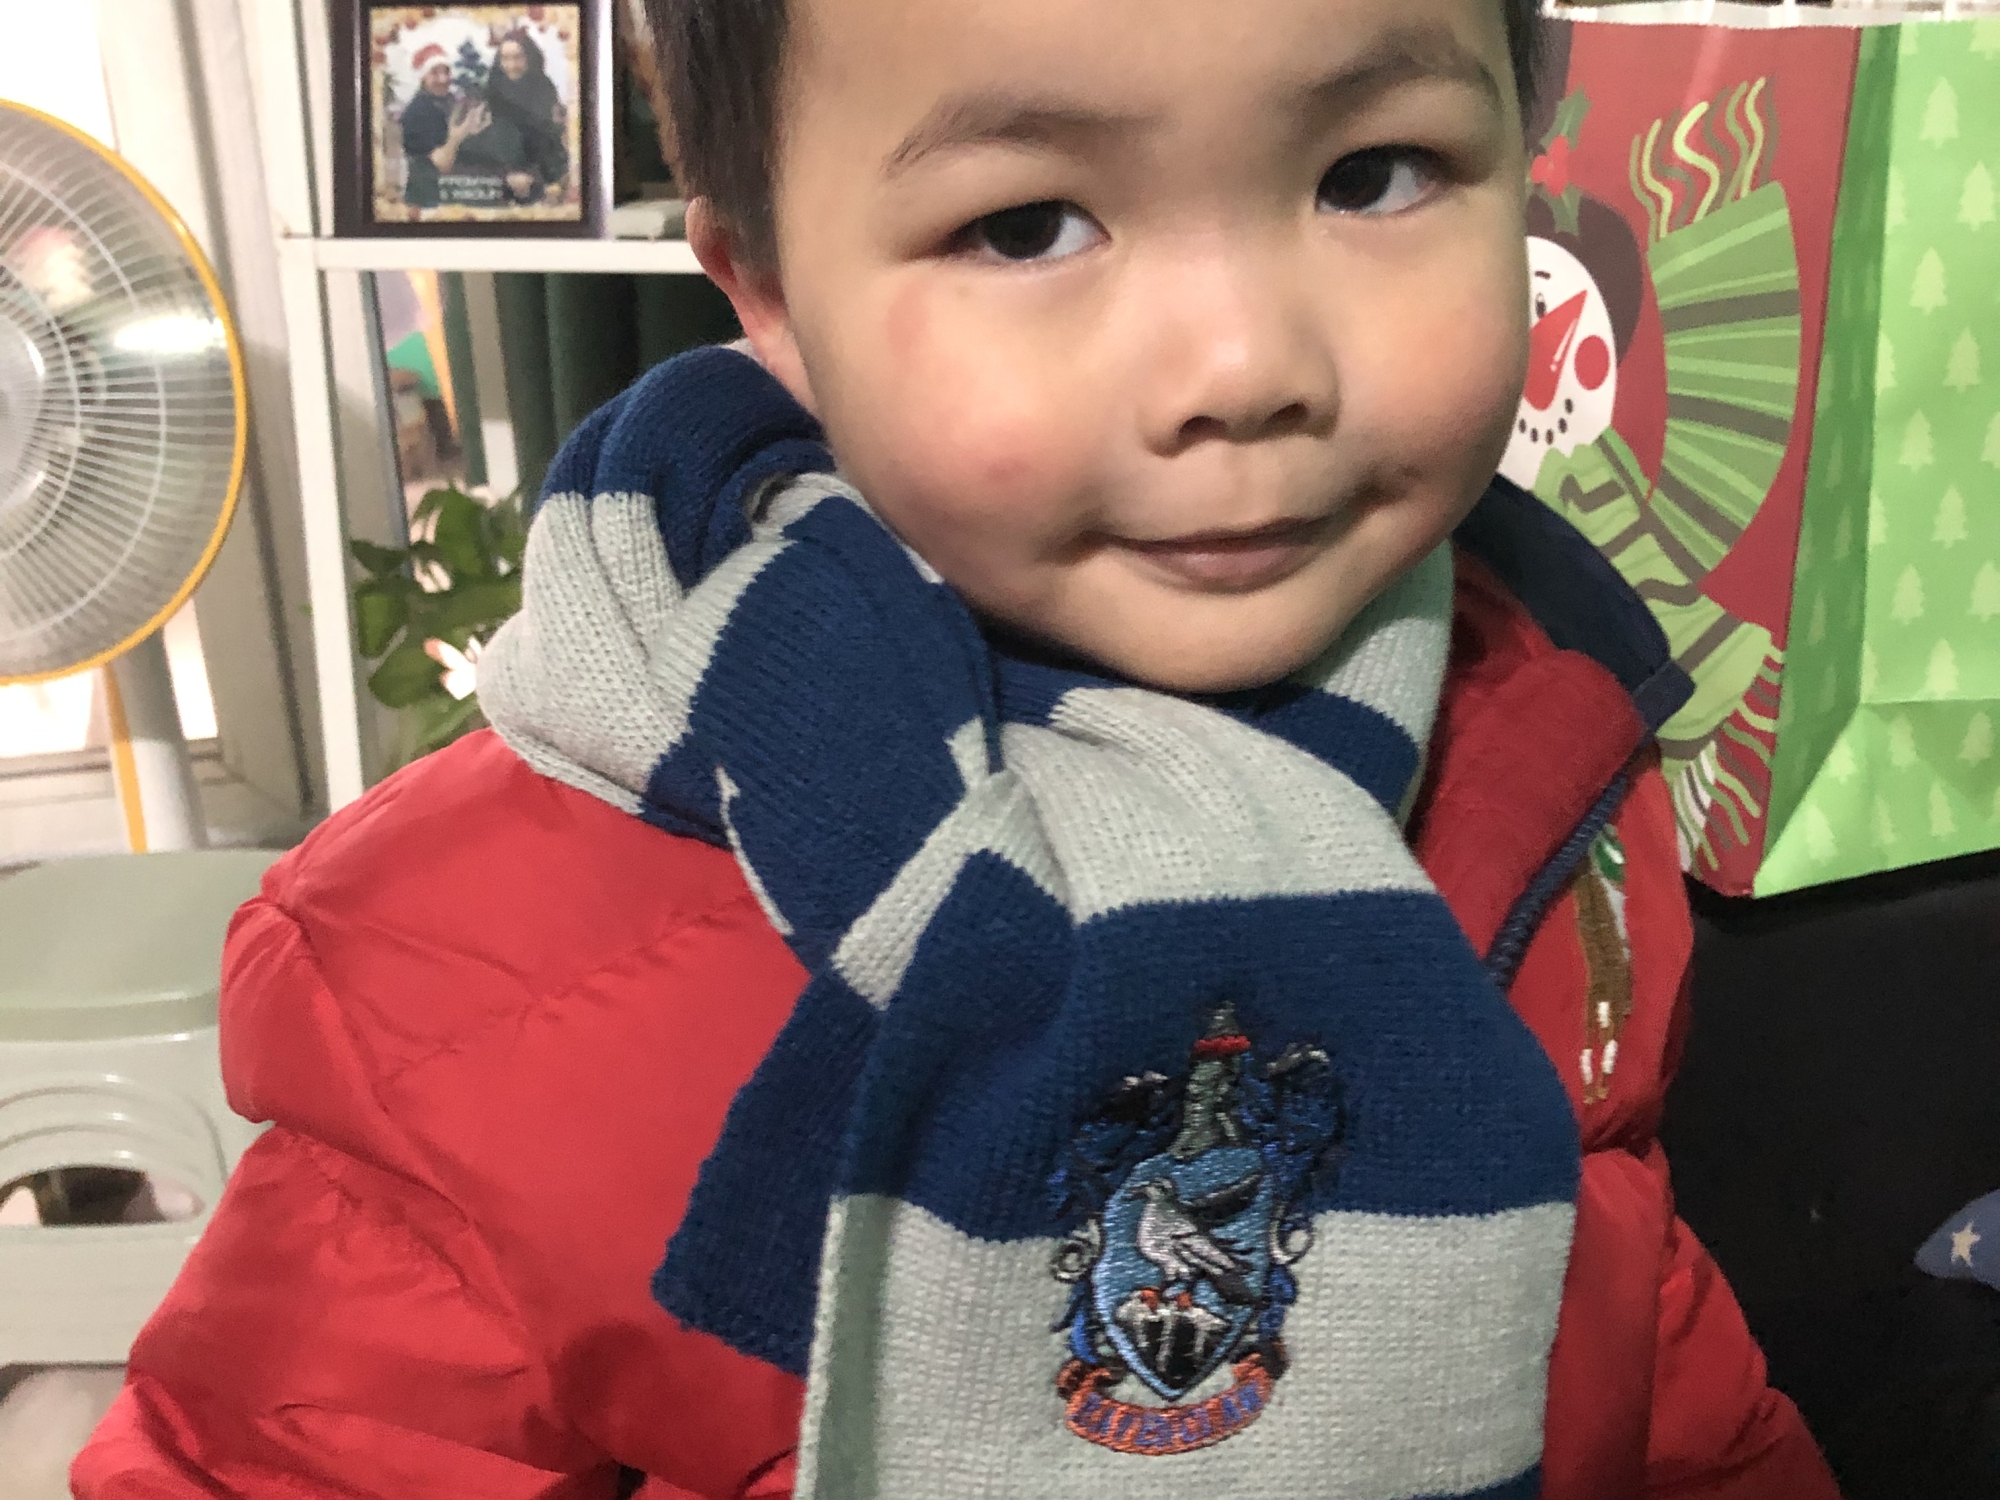 I decided Ethan was Ravenclaw: creative, intelligent, and thoughtful. Plus we like the colors.